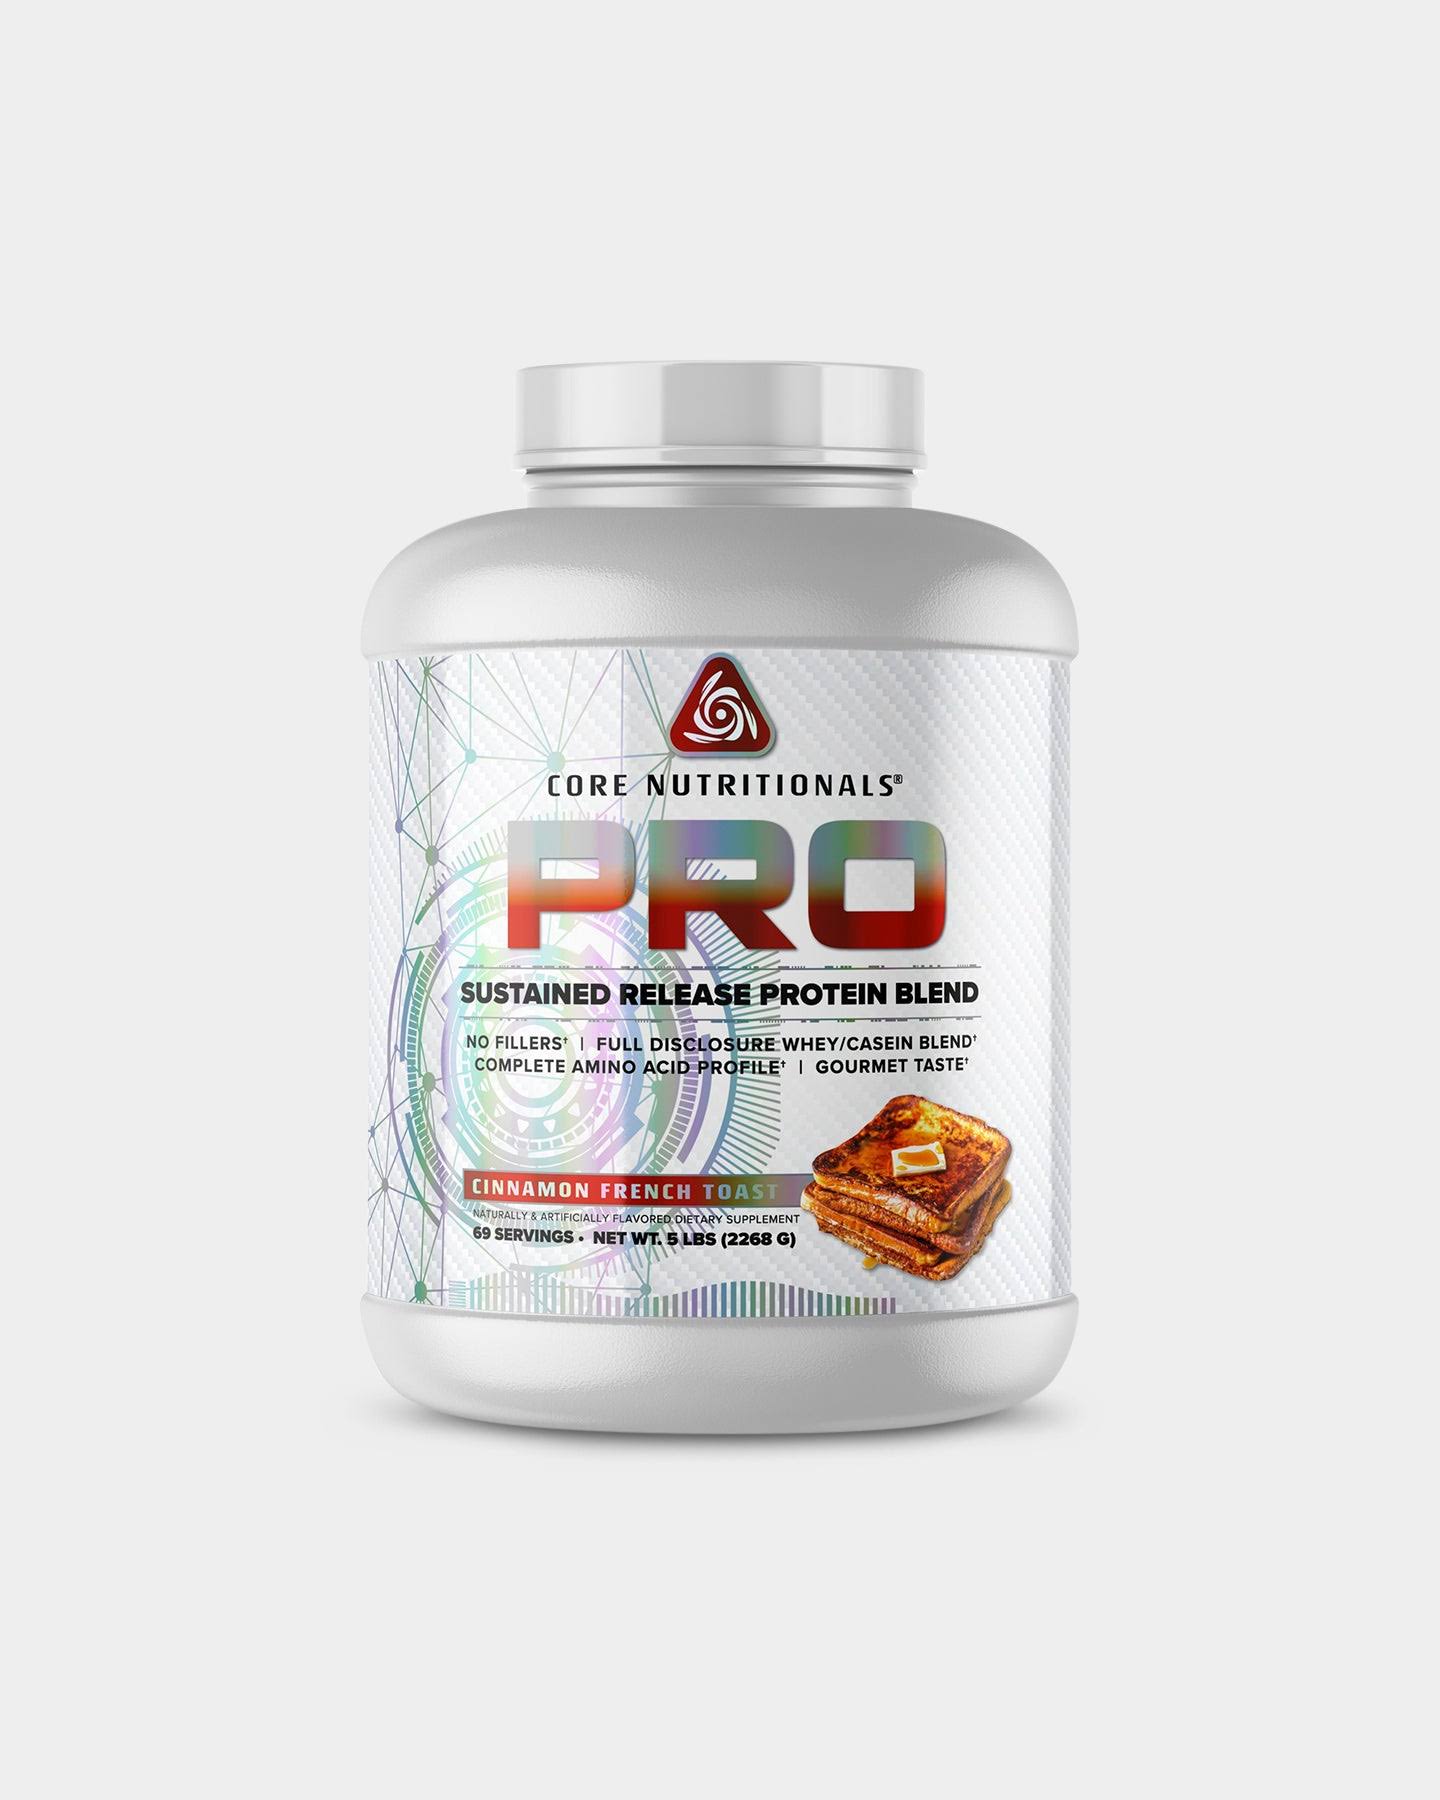 Core Nutritionals Core PRO Protein Blend in Cinnamon French Toast | 2.2 Kilograms